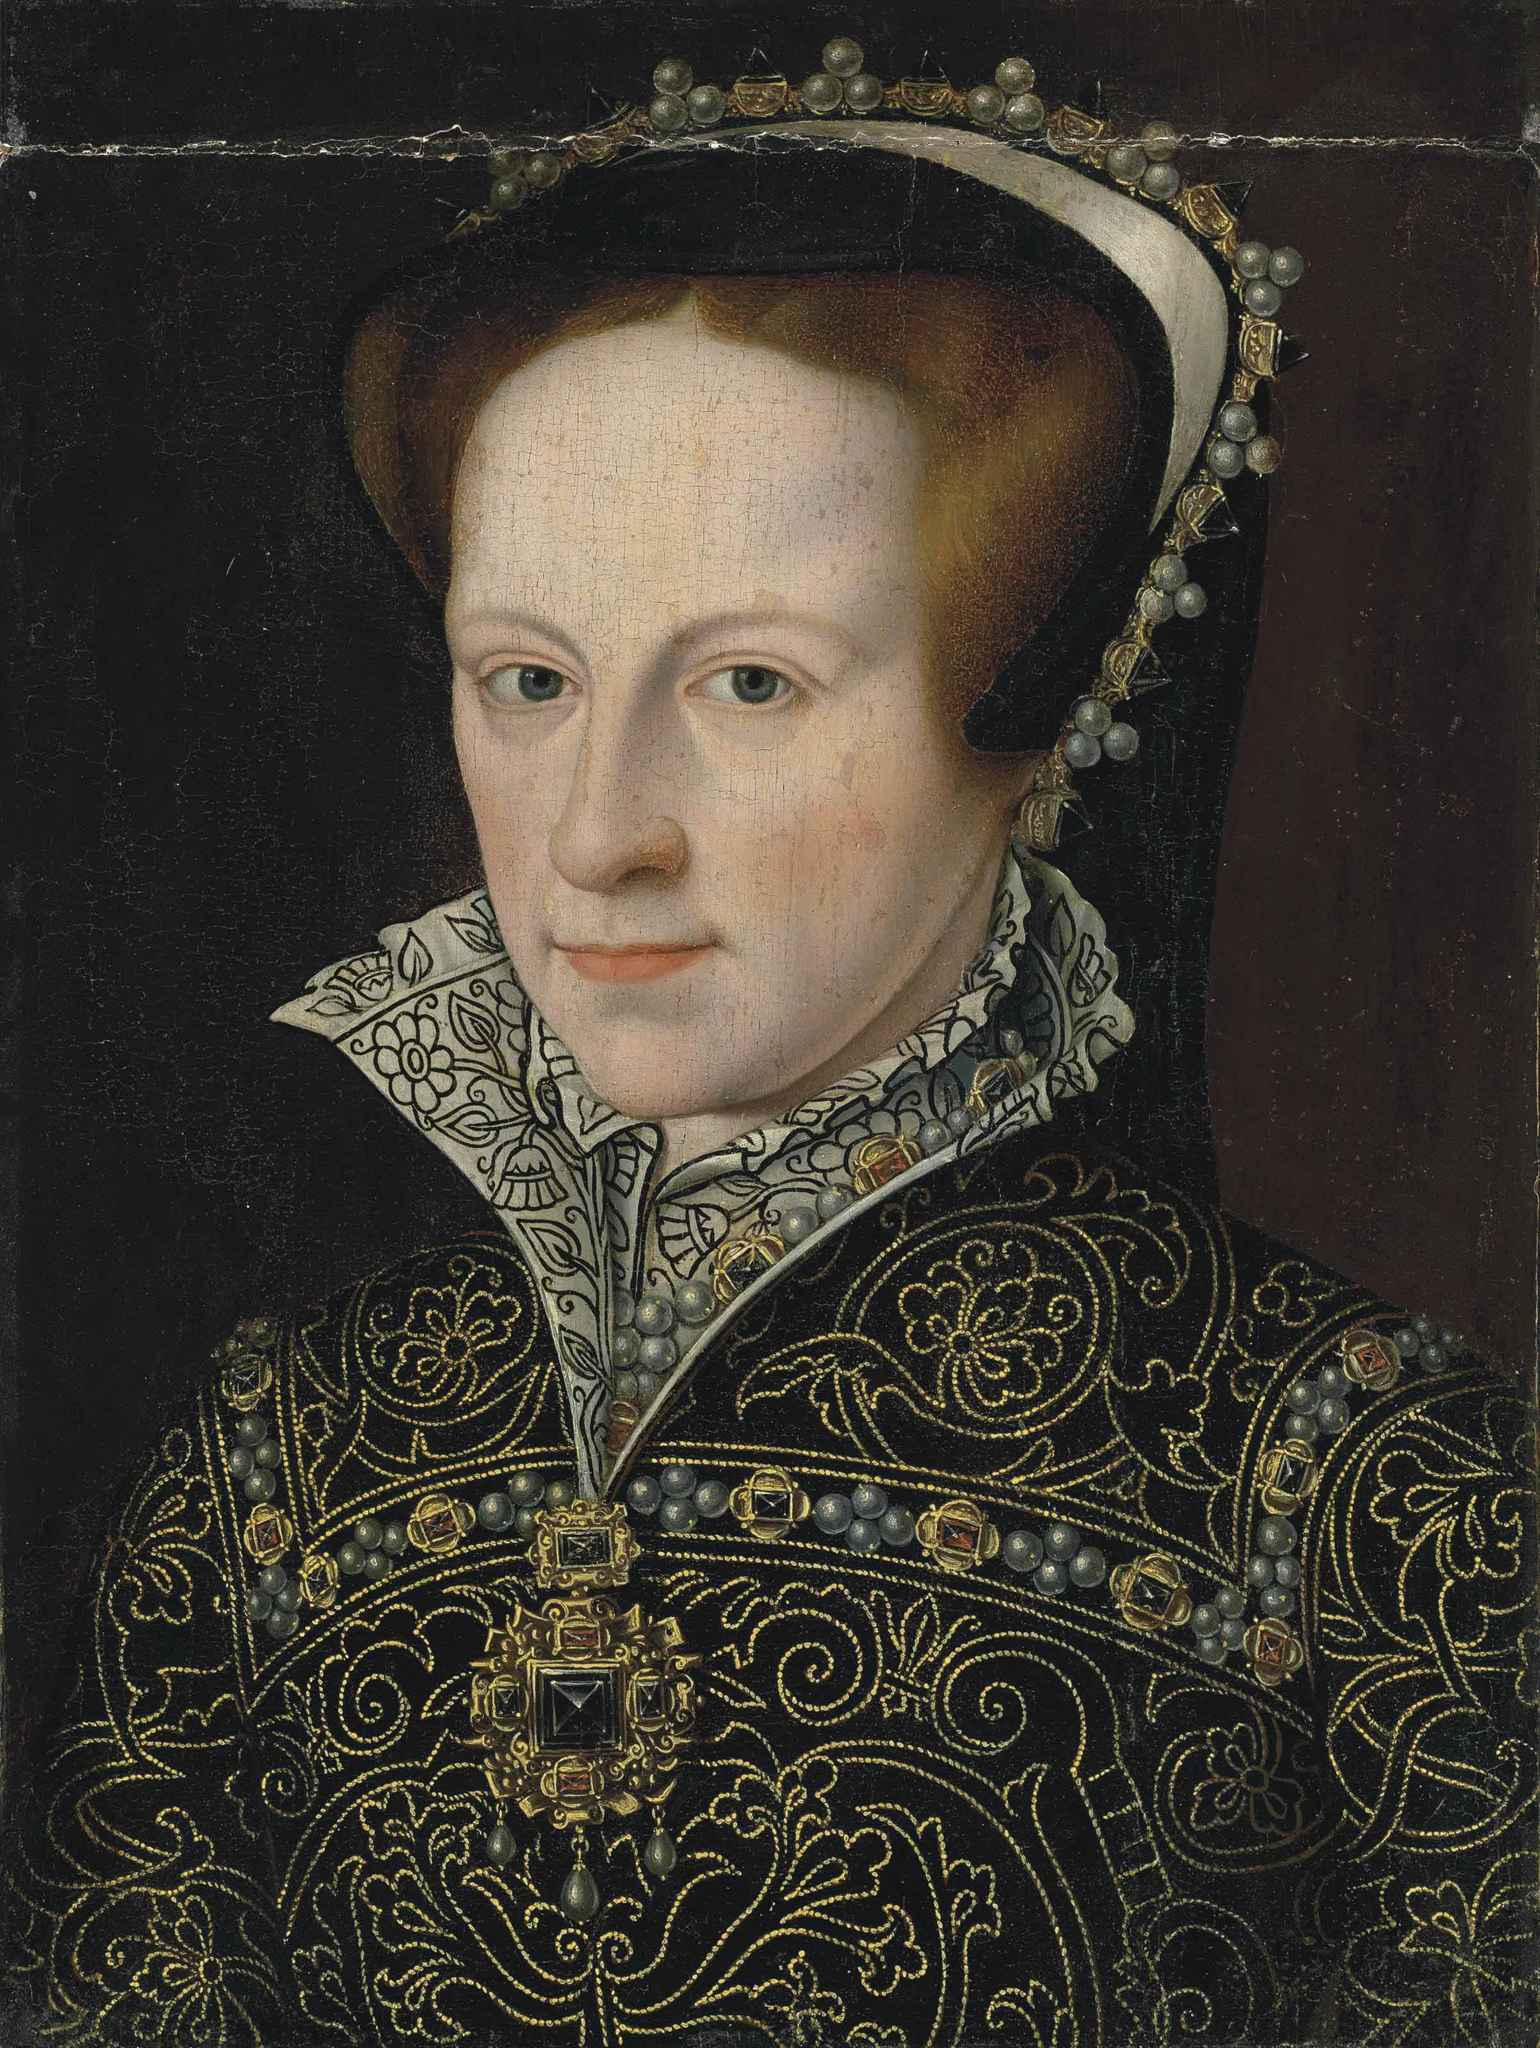 After Antonio Mor Mary I of England in an embroidered dress